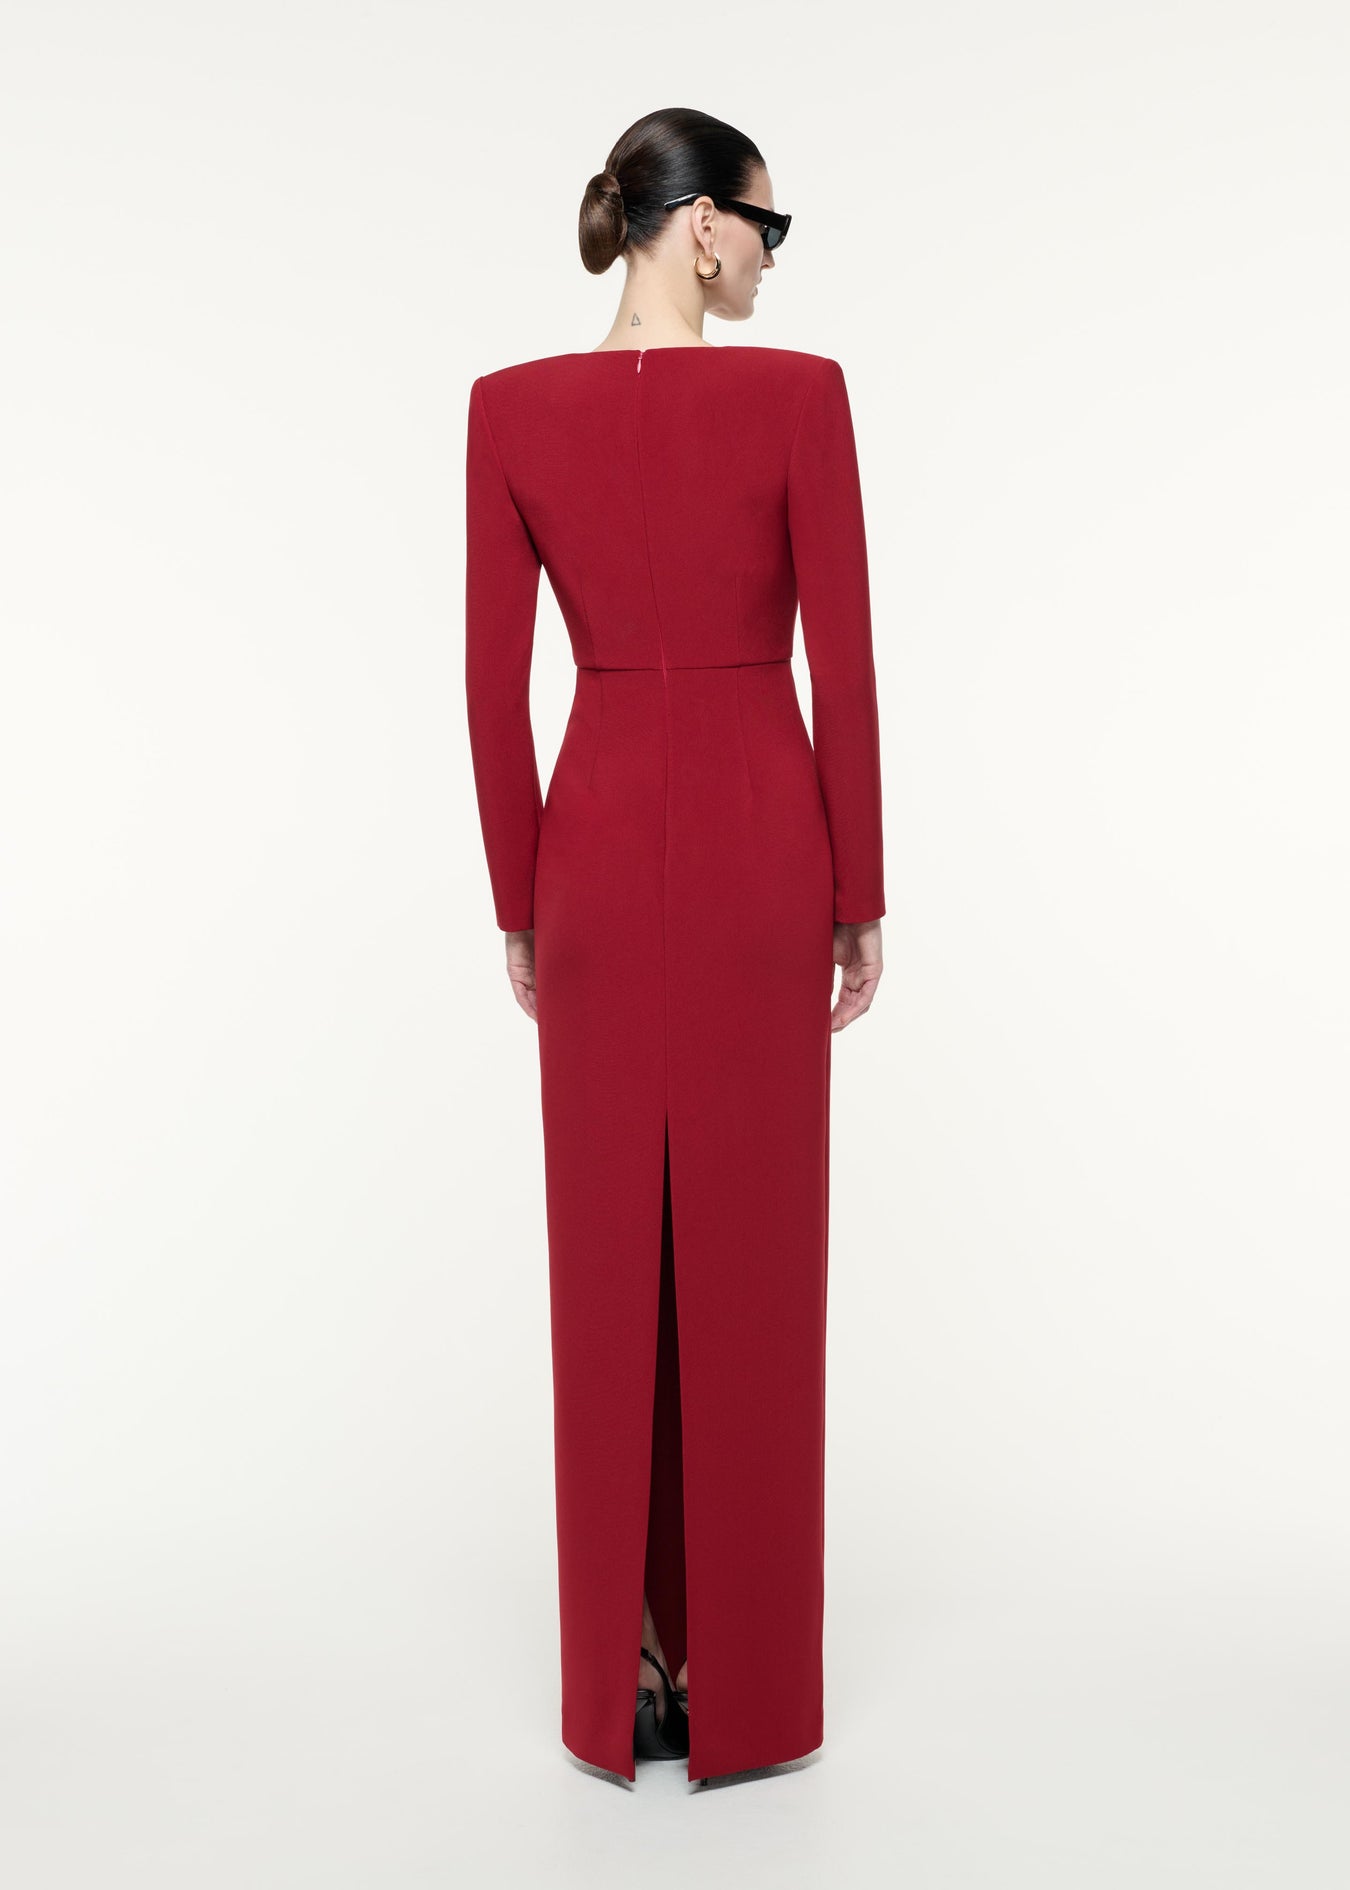 A back view image of a model wearing the Long Sleeve Crepe Maxi Dress in Red